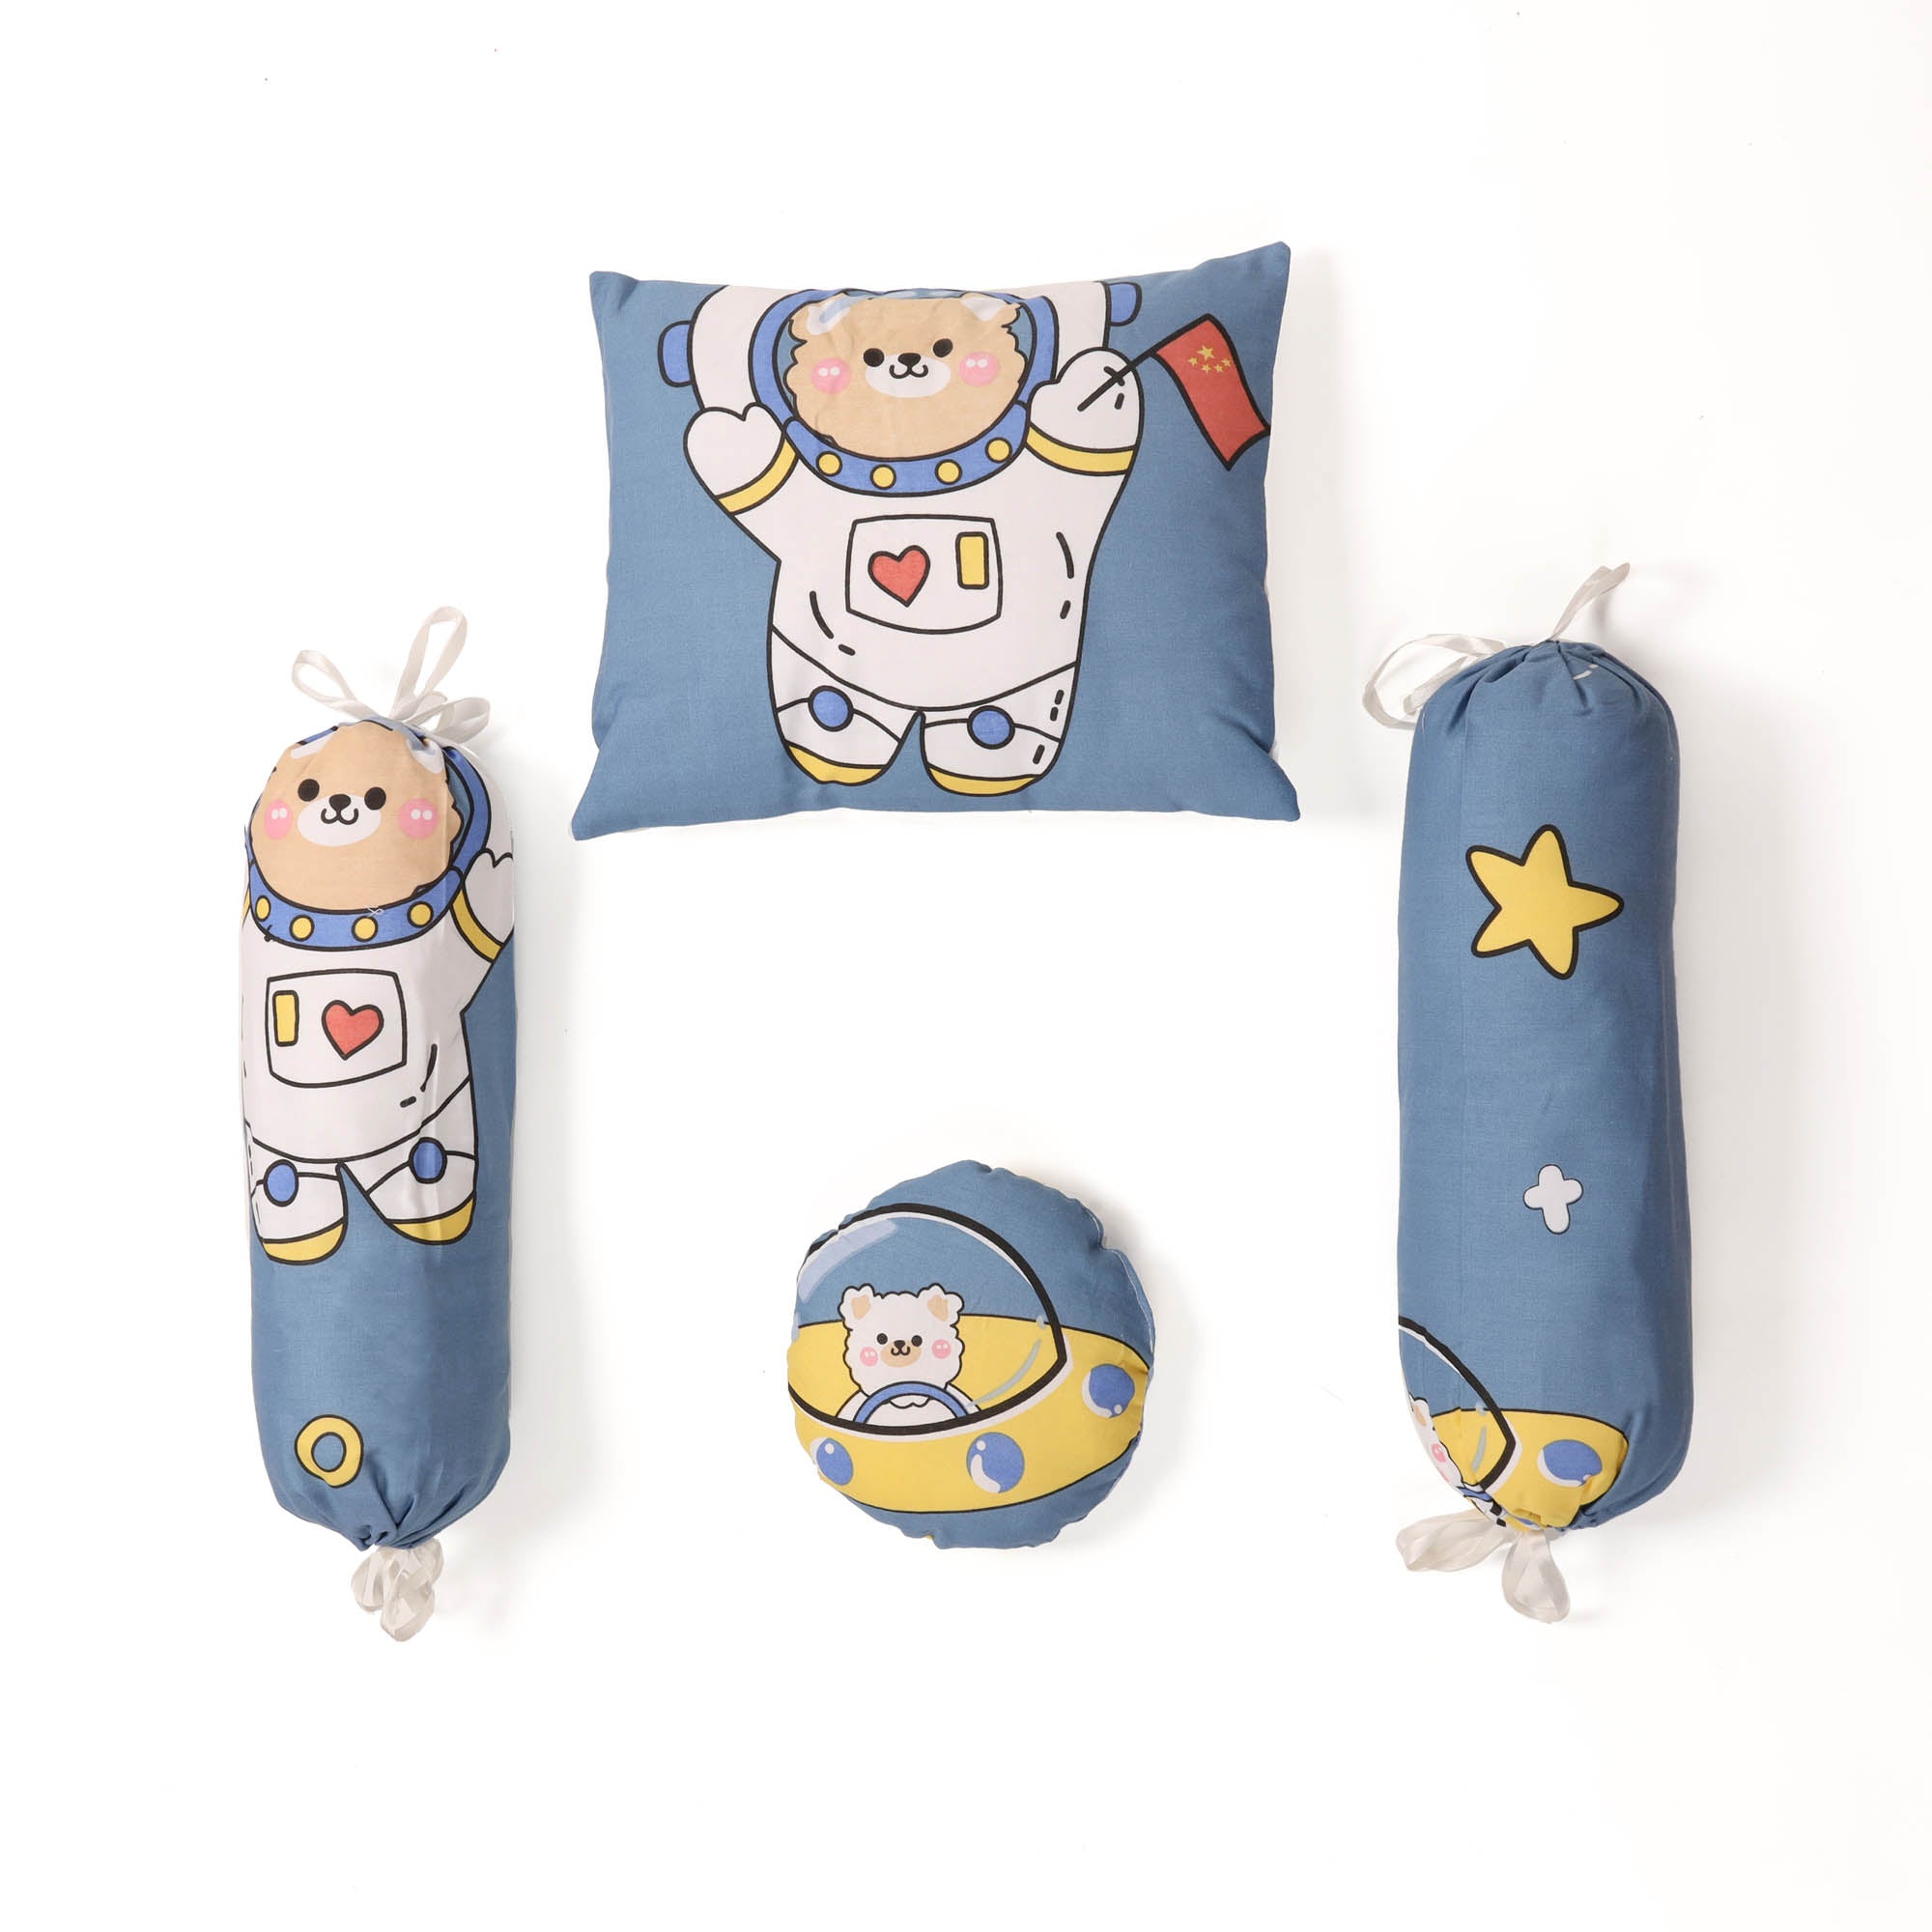 Kicks & Crawl- Baby Space Explorer 5 Pc Quilted Bedding Set - With/Without Bumper